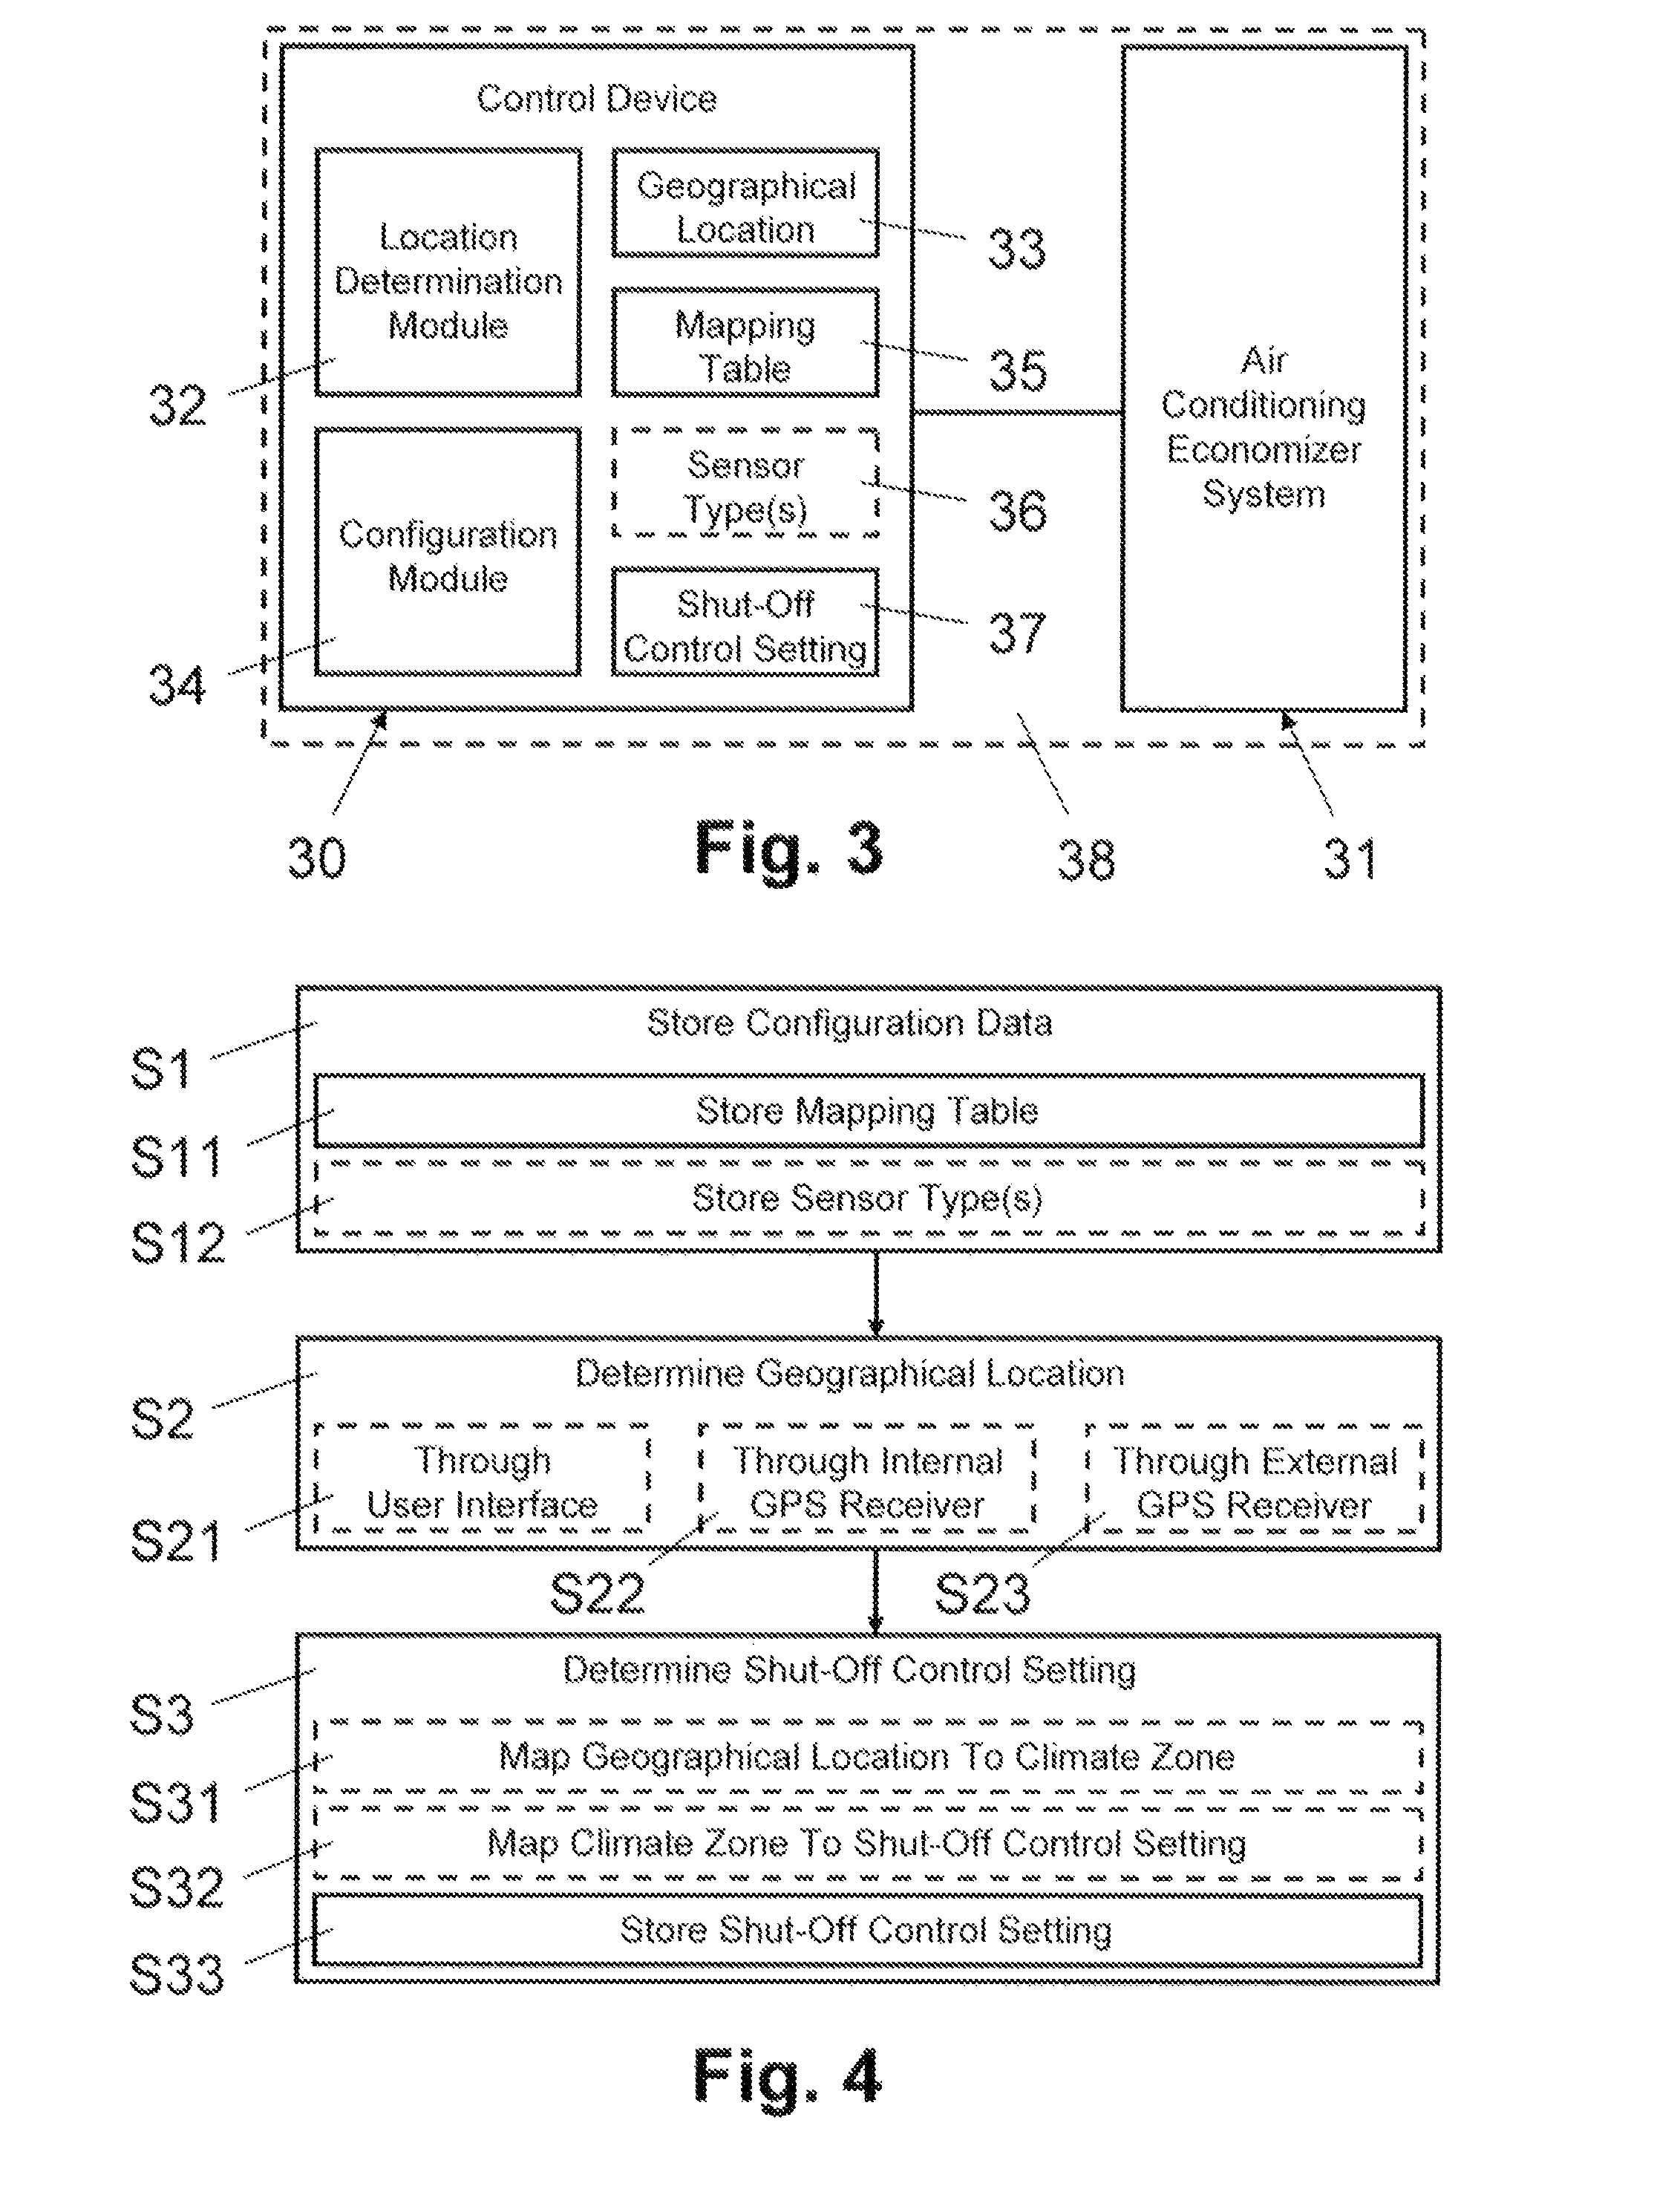 Control method and device for an air conditioning economizer system